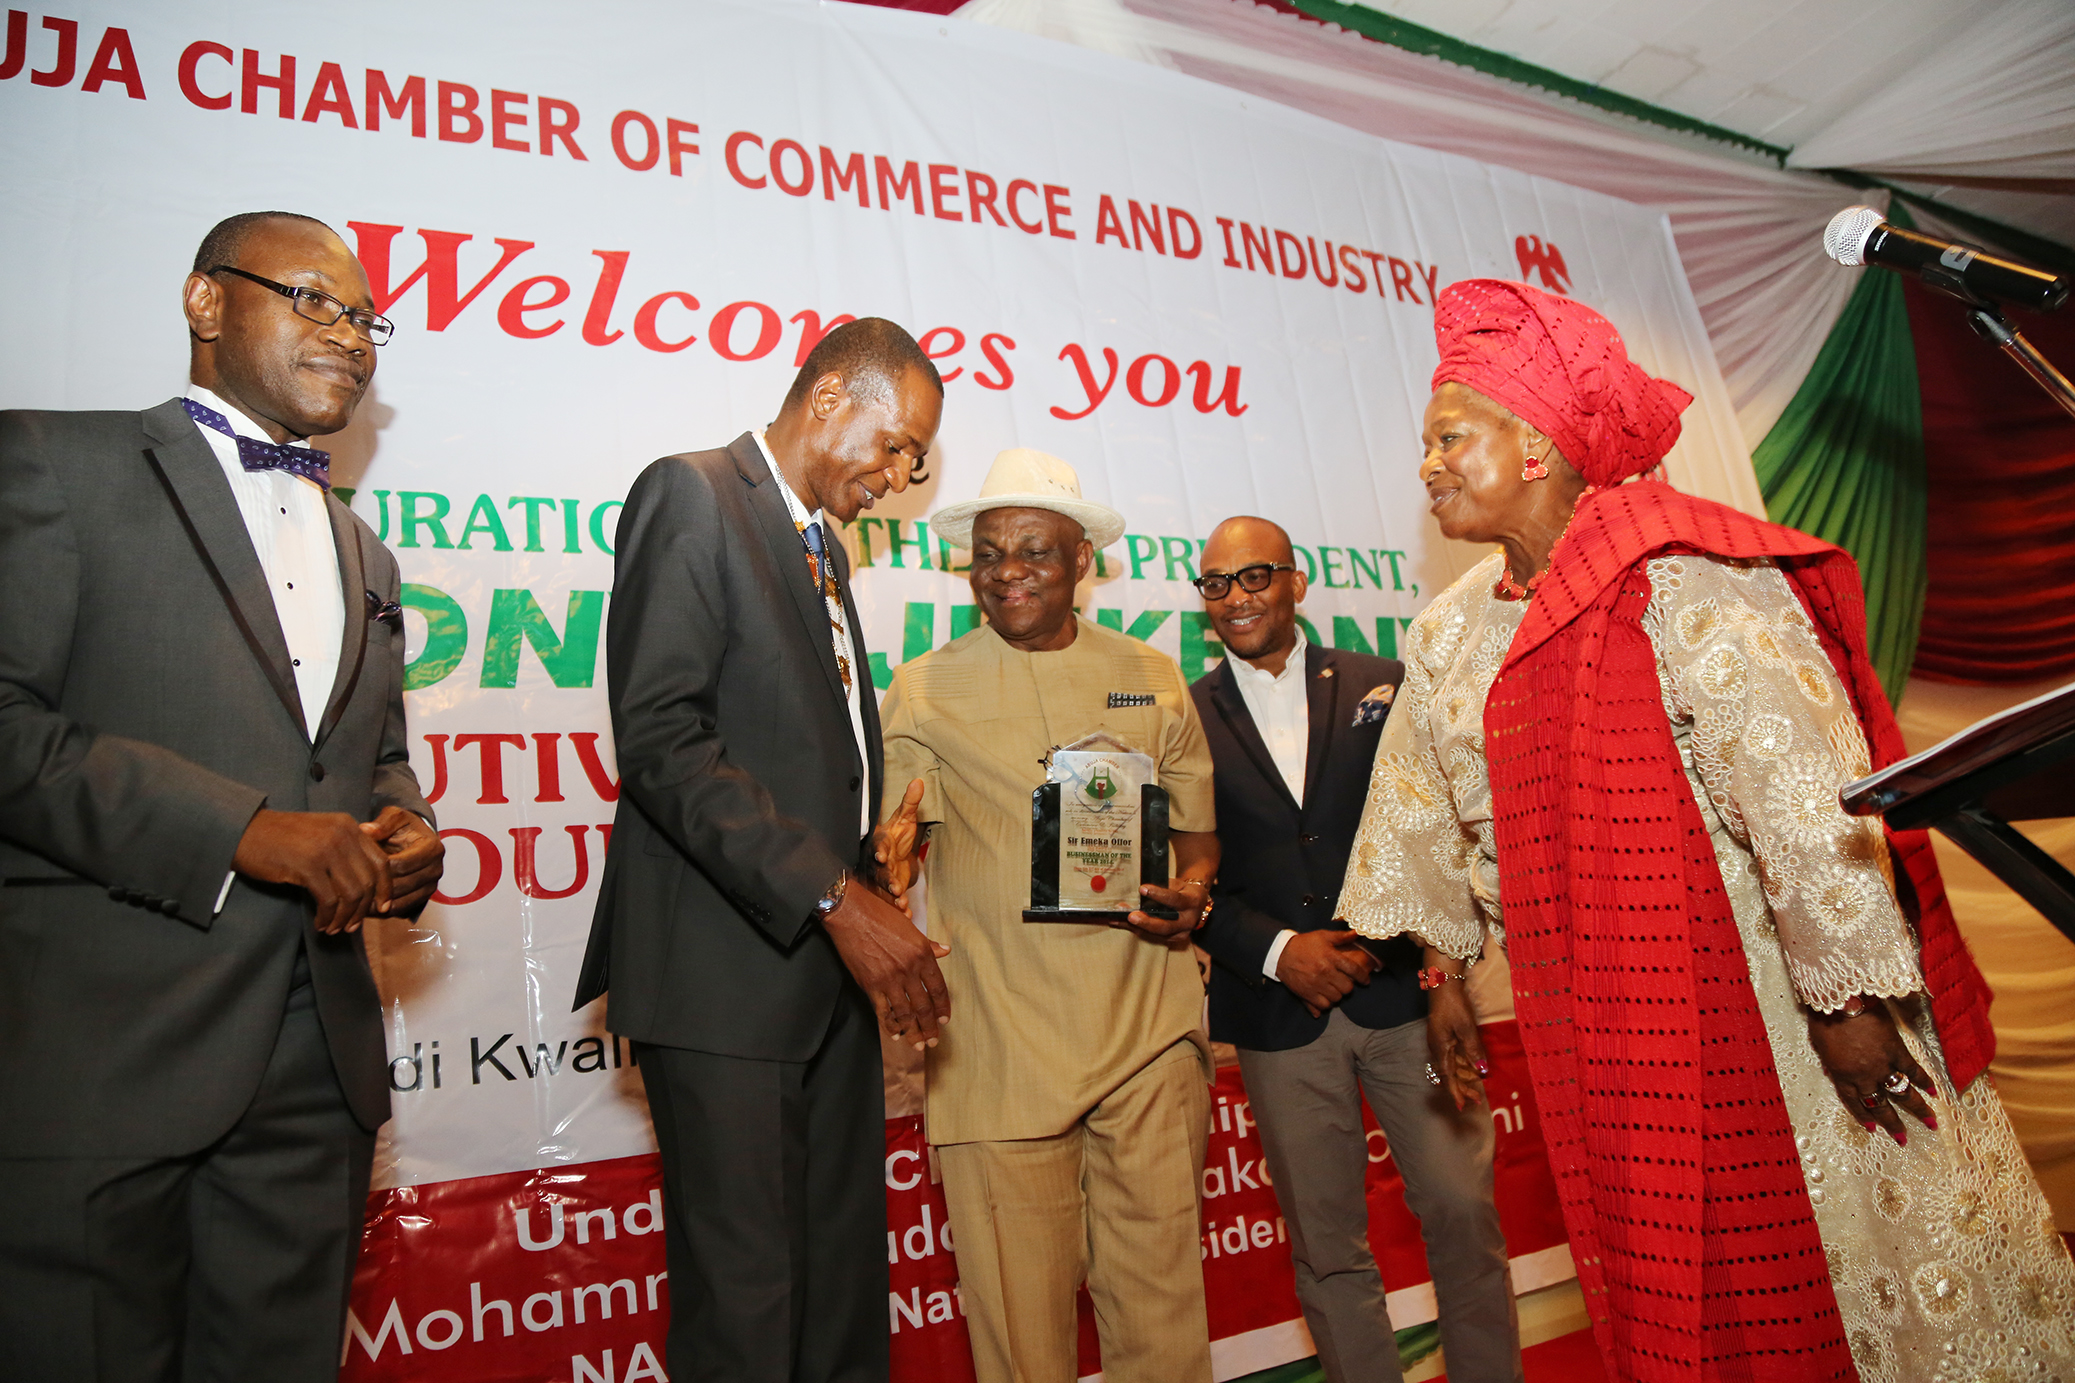 At the Inauguration of the new President of the Abuja Chambers of Commerce and Industry